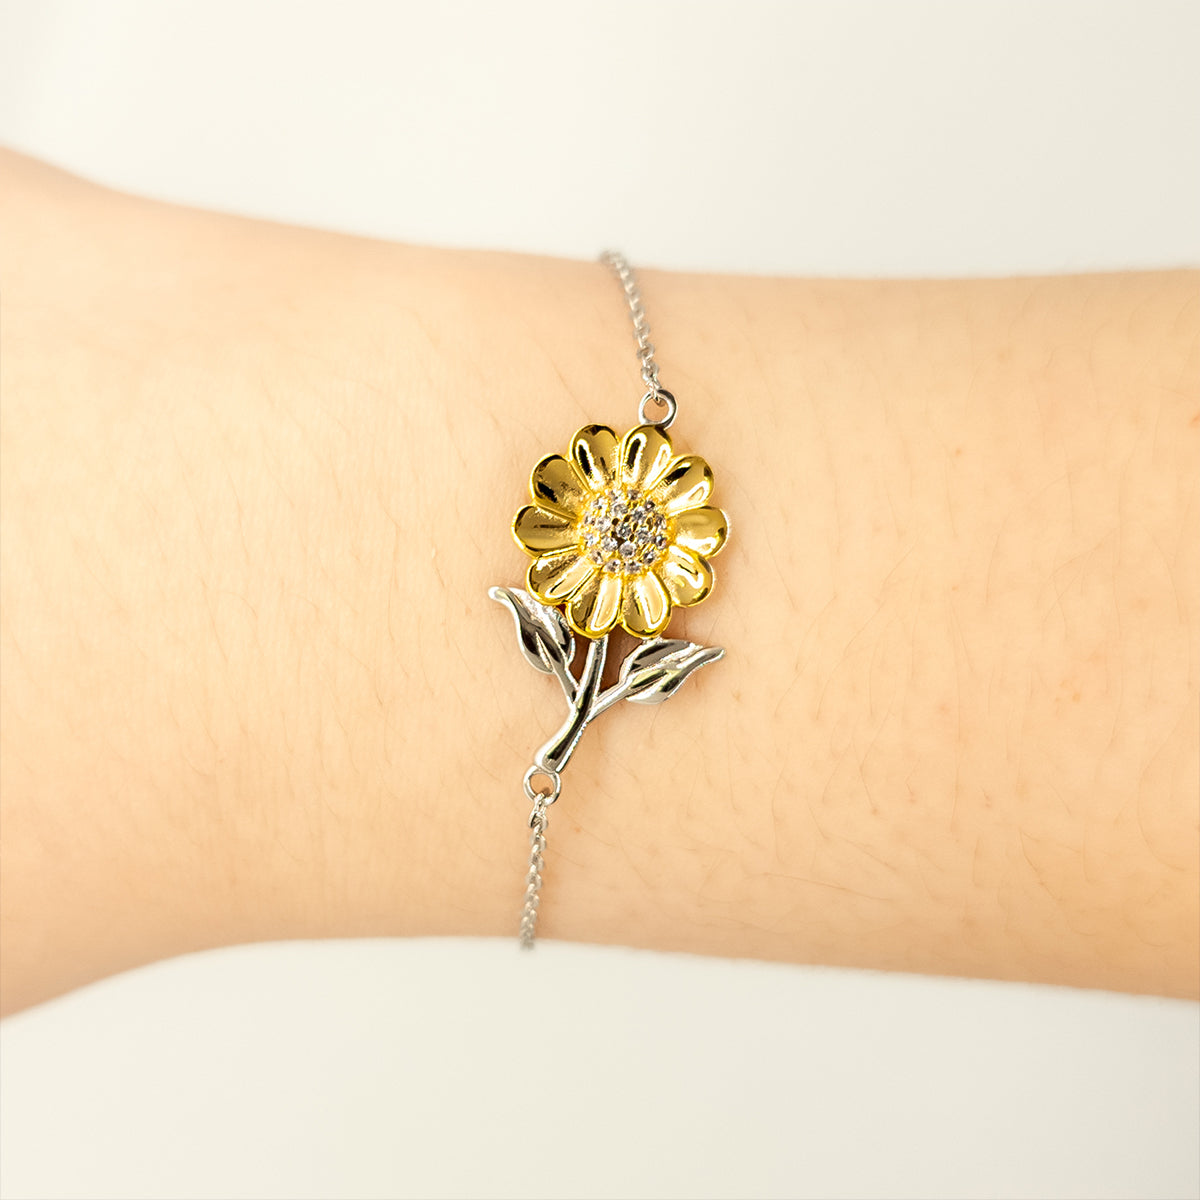 Son In Law Motivational Gifts from Mother In Law, Remember to never give up no matter what, Inspirational Birthday Sunflower Bracelet for Son In Law